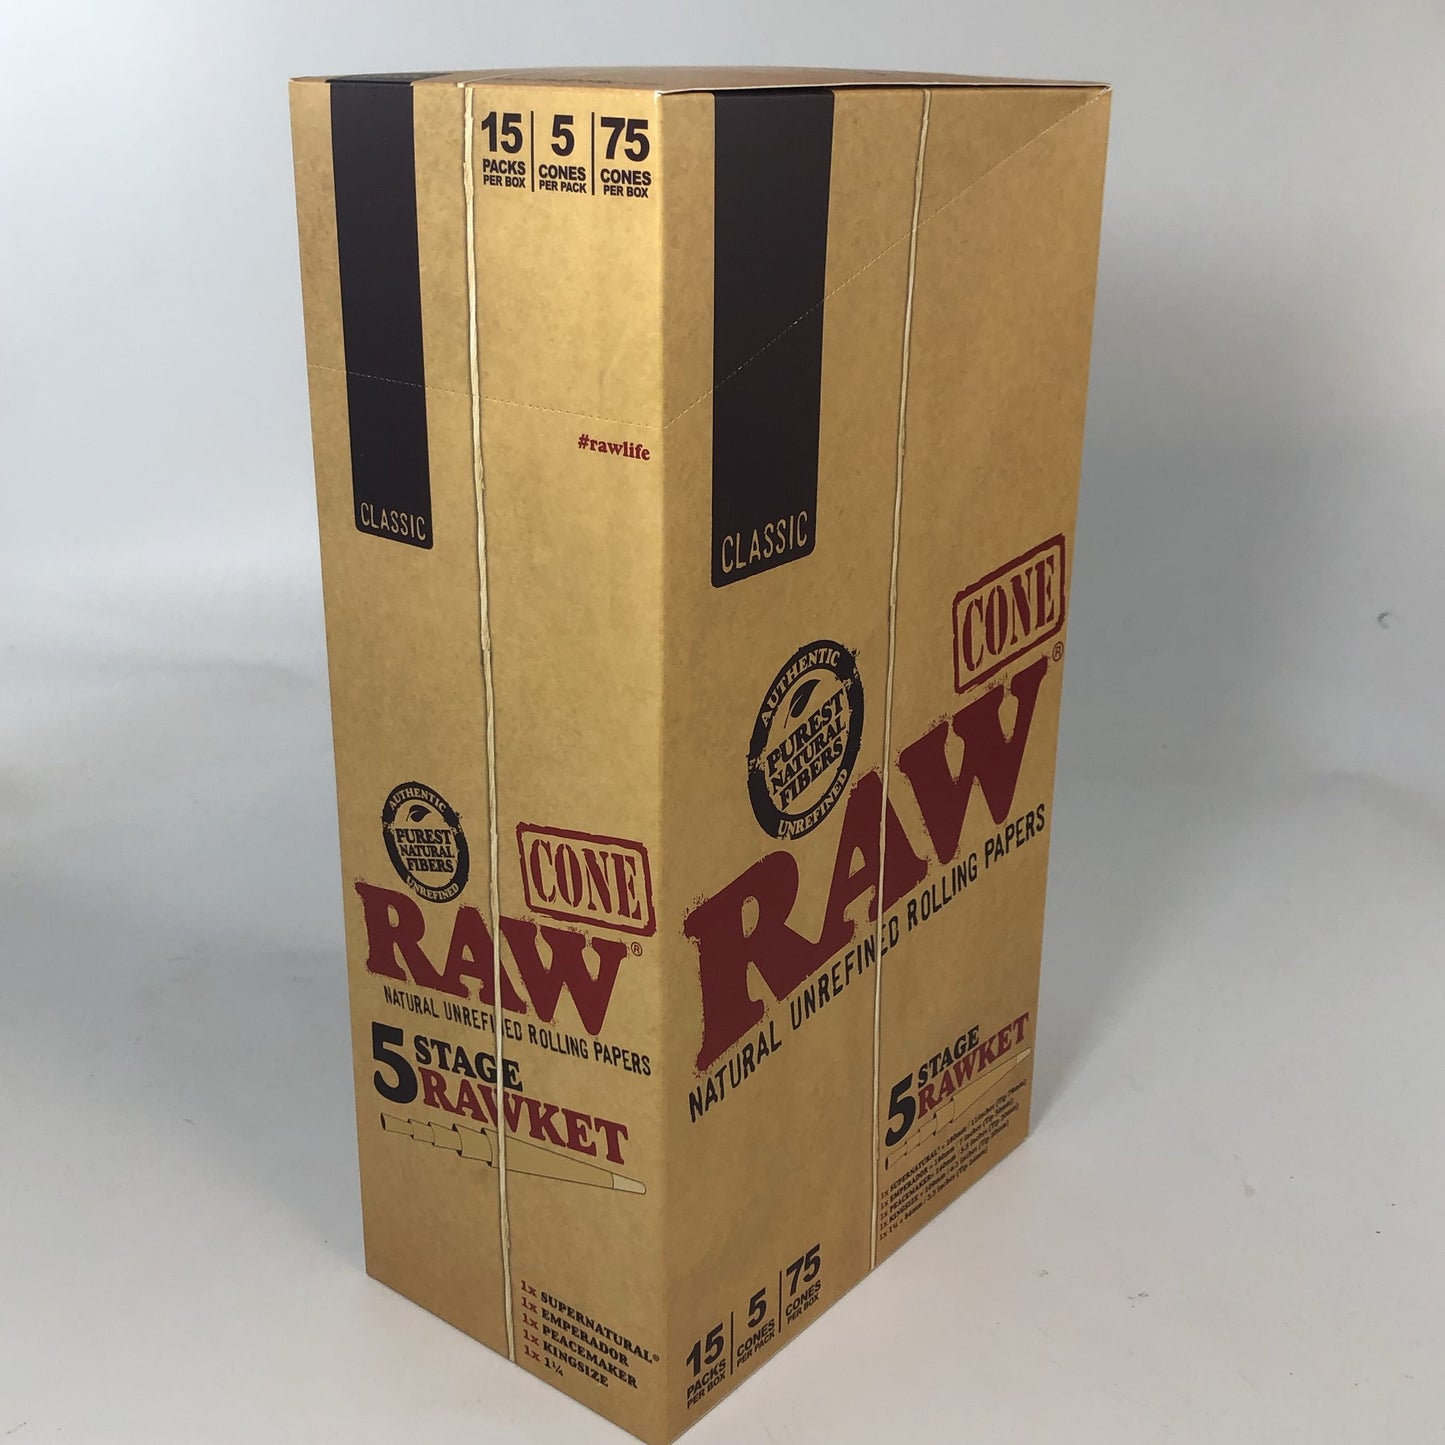 RAWthentic Classic 5 Stage RAWket